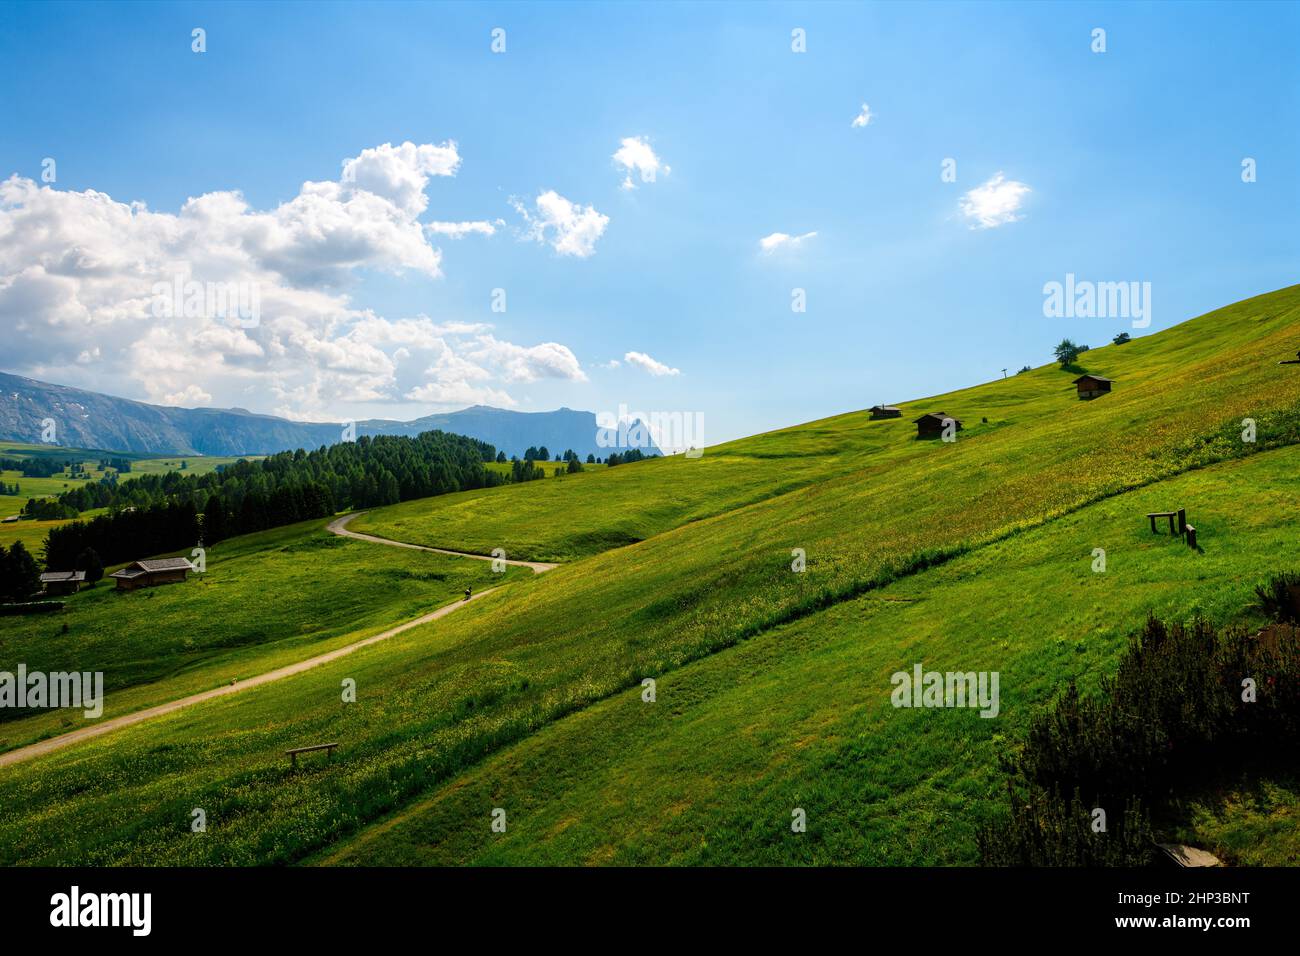 A small alpine hut on a gently sloping green meadow with a bright blue sky and a few fleecy clouds. Stock Photo